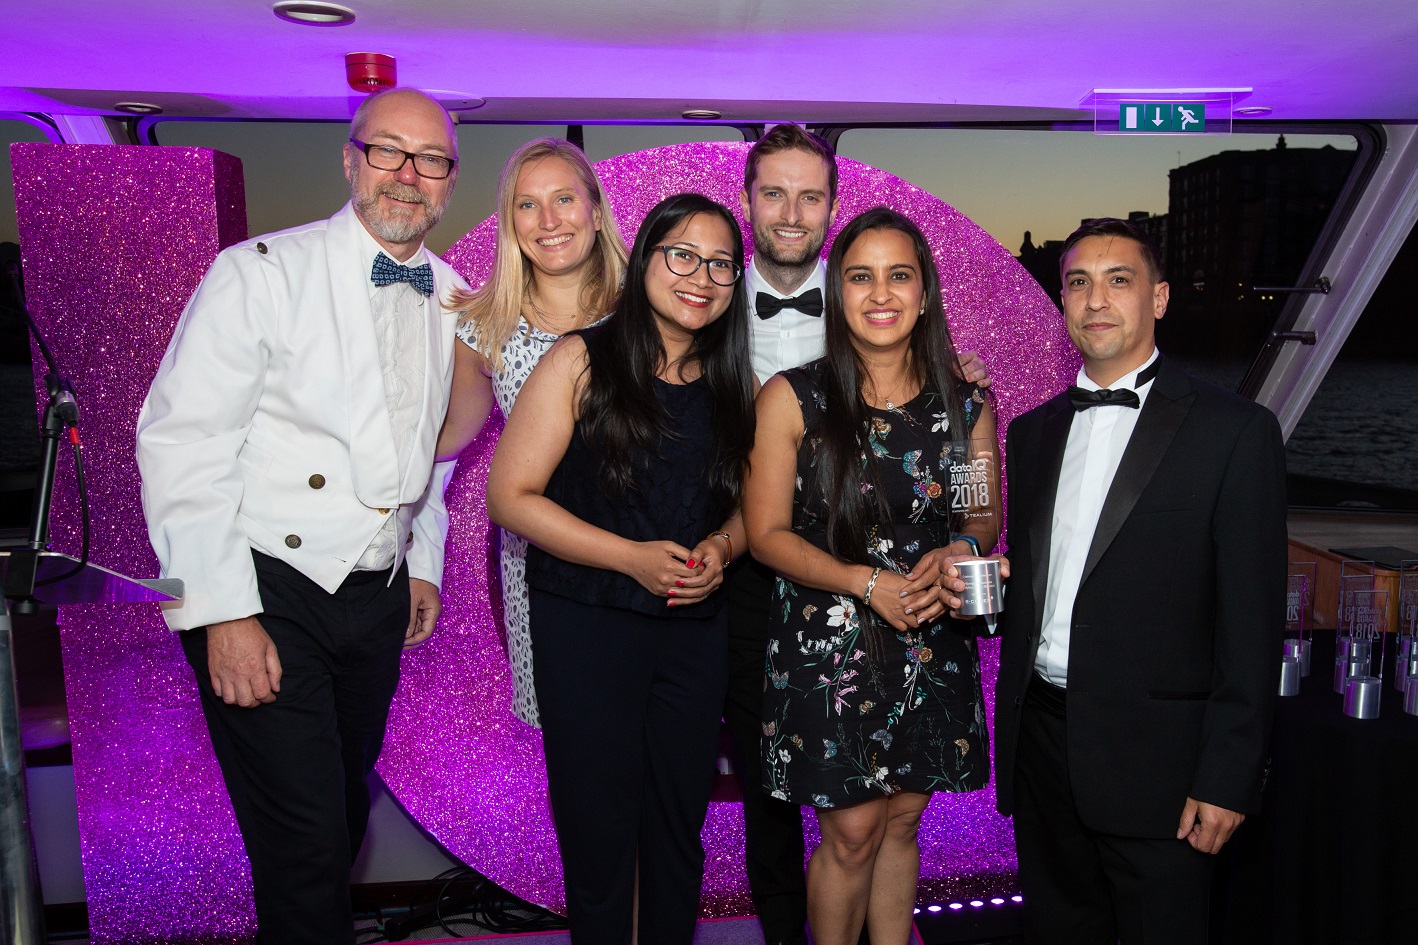 We are sailing – R-cubed’s night out at the Data IQ Awards.